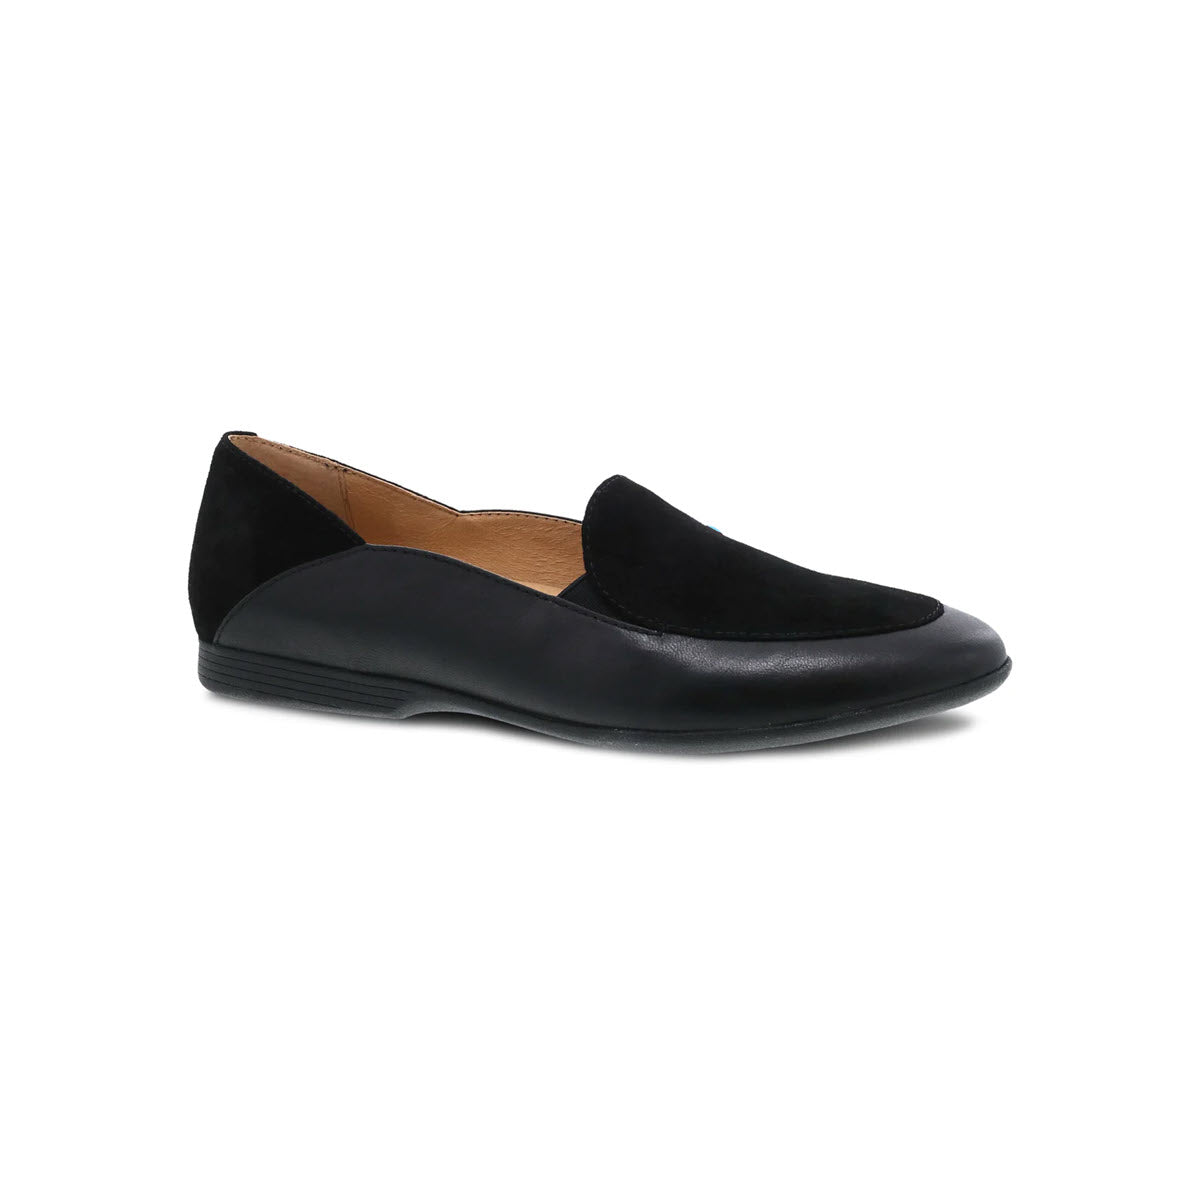 A single Dansko lace black glazed loafer shoe with a low heel and smooth finish, displayed on a white background.